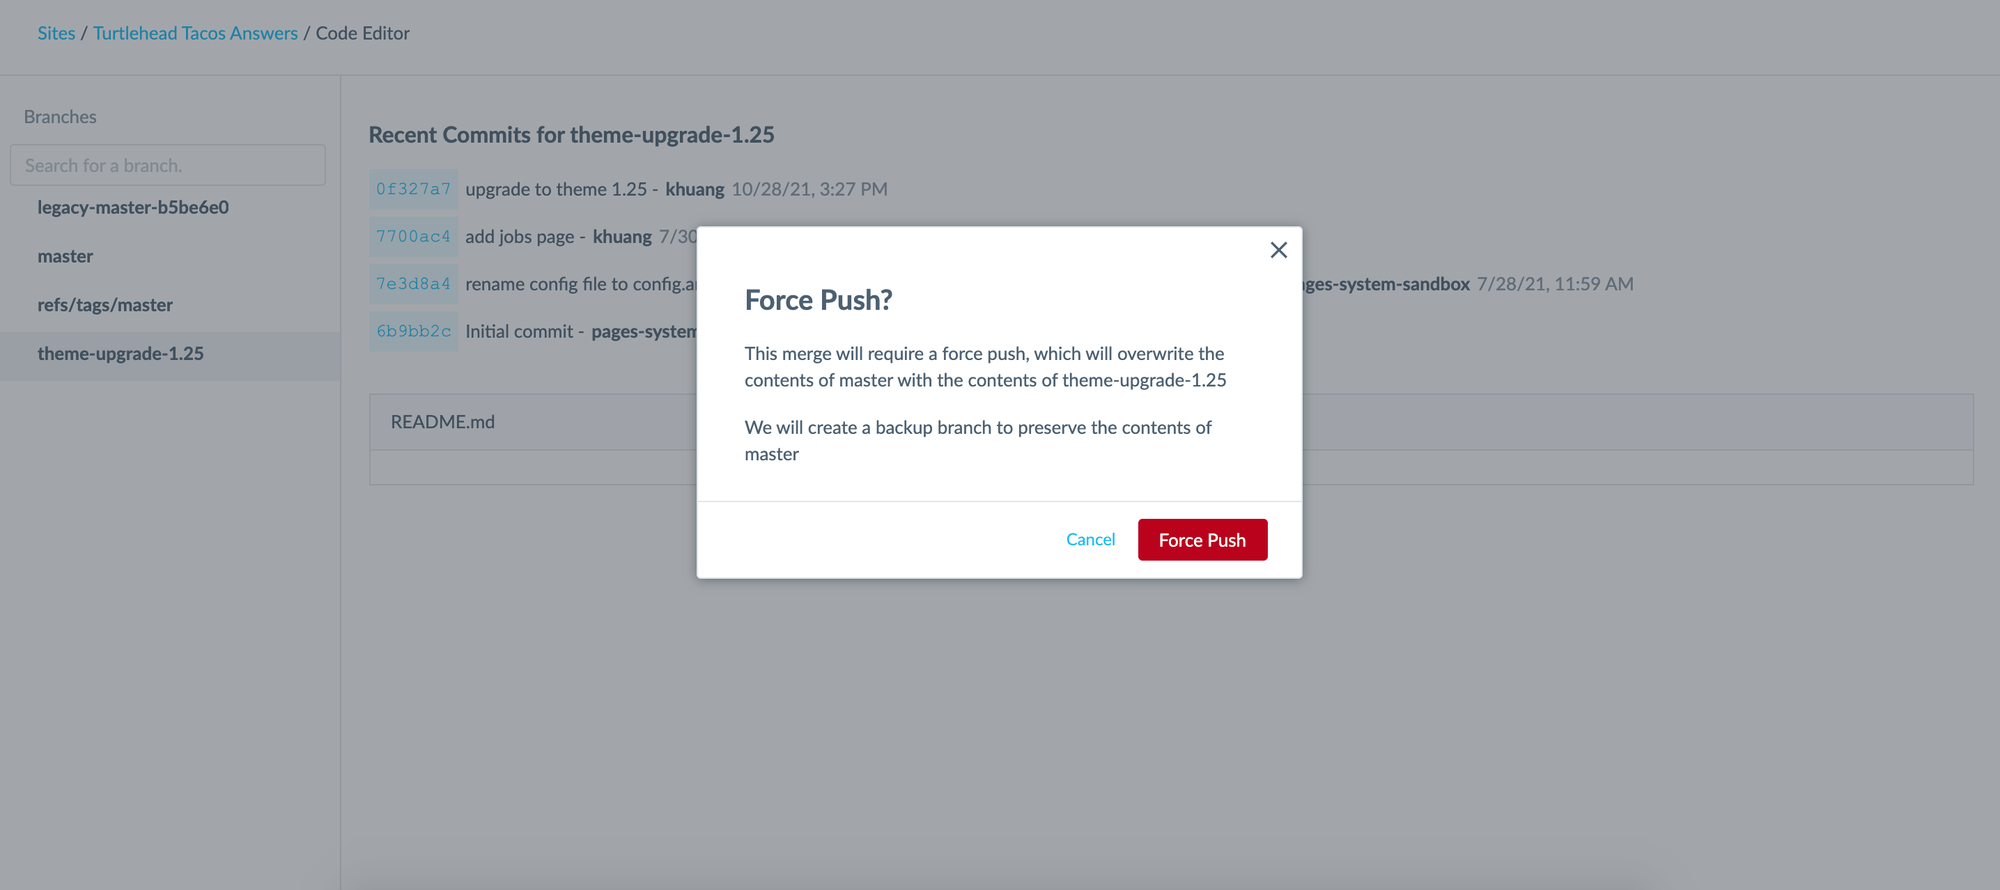 Force Push popup message